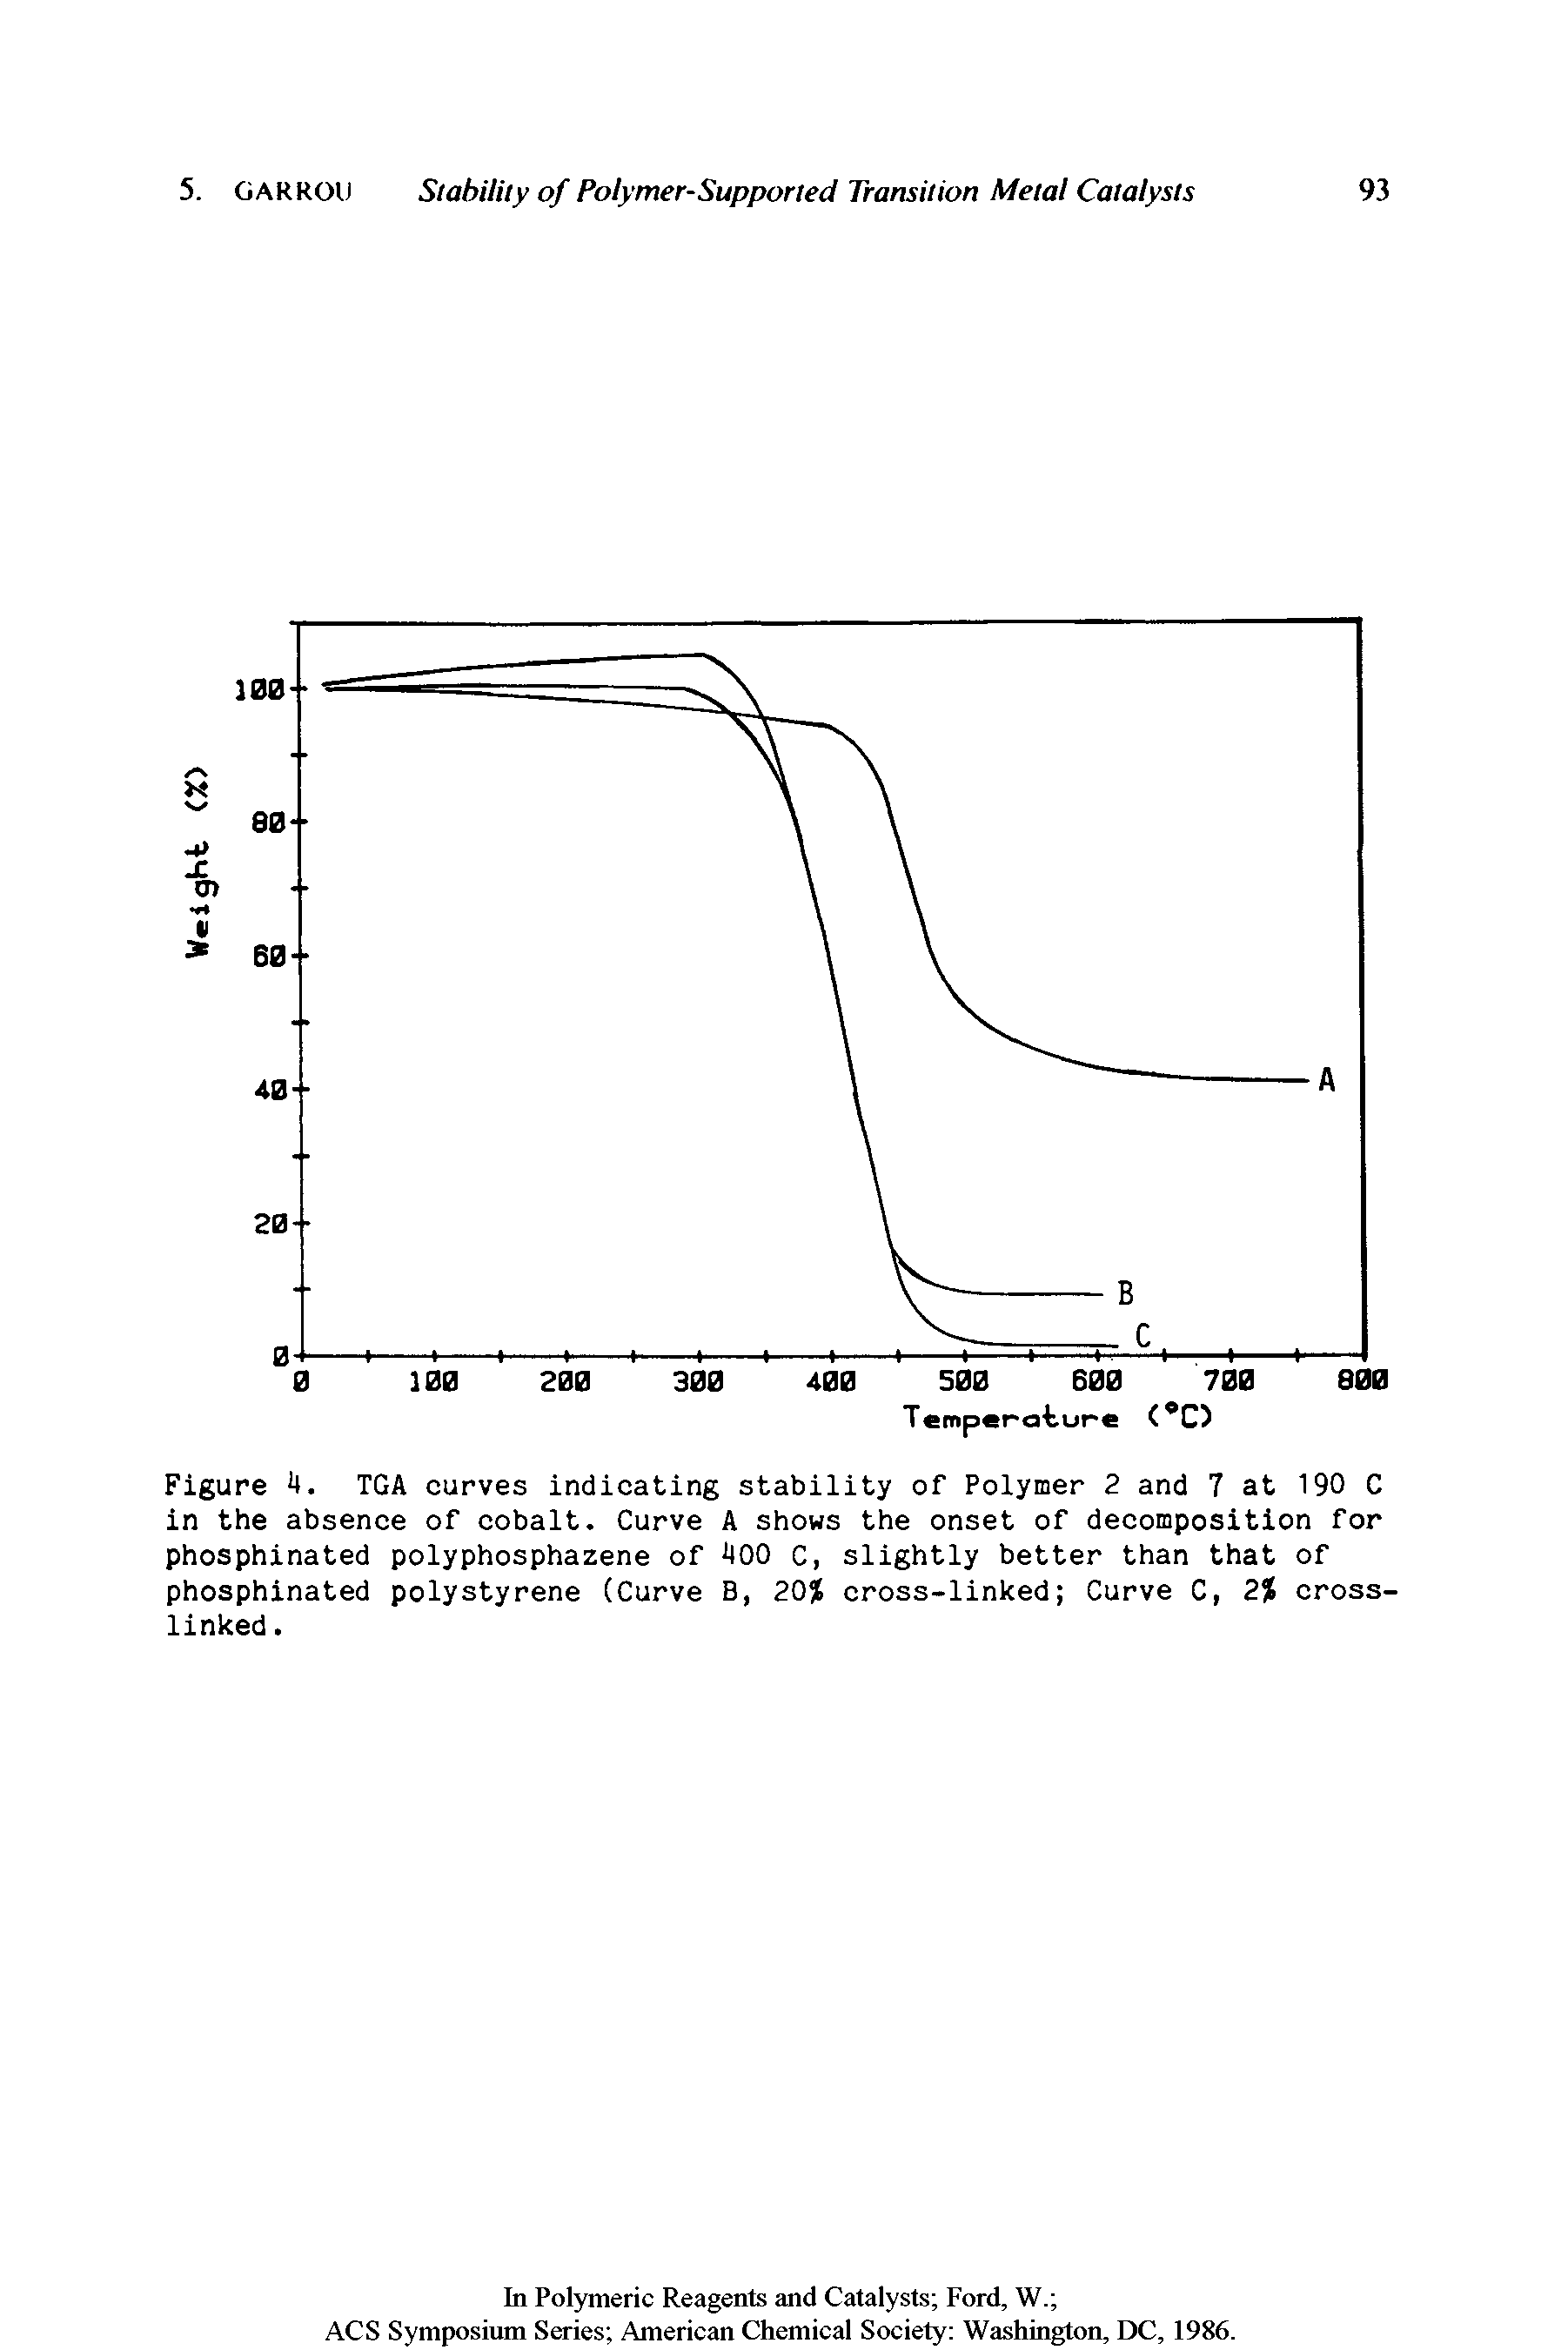 Figure 4. TGA curves indicating stability of Polymer 2 and 7 at 190 C in the absence of cobalt. Curve A shows the onset of decomposition for phosphinated polyphosphazene of ilOO C, slightly better than that of phosphinated polystyrene (Curve B, 2Q% cross-linked Curve C, 2 cross-linked. ...